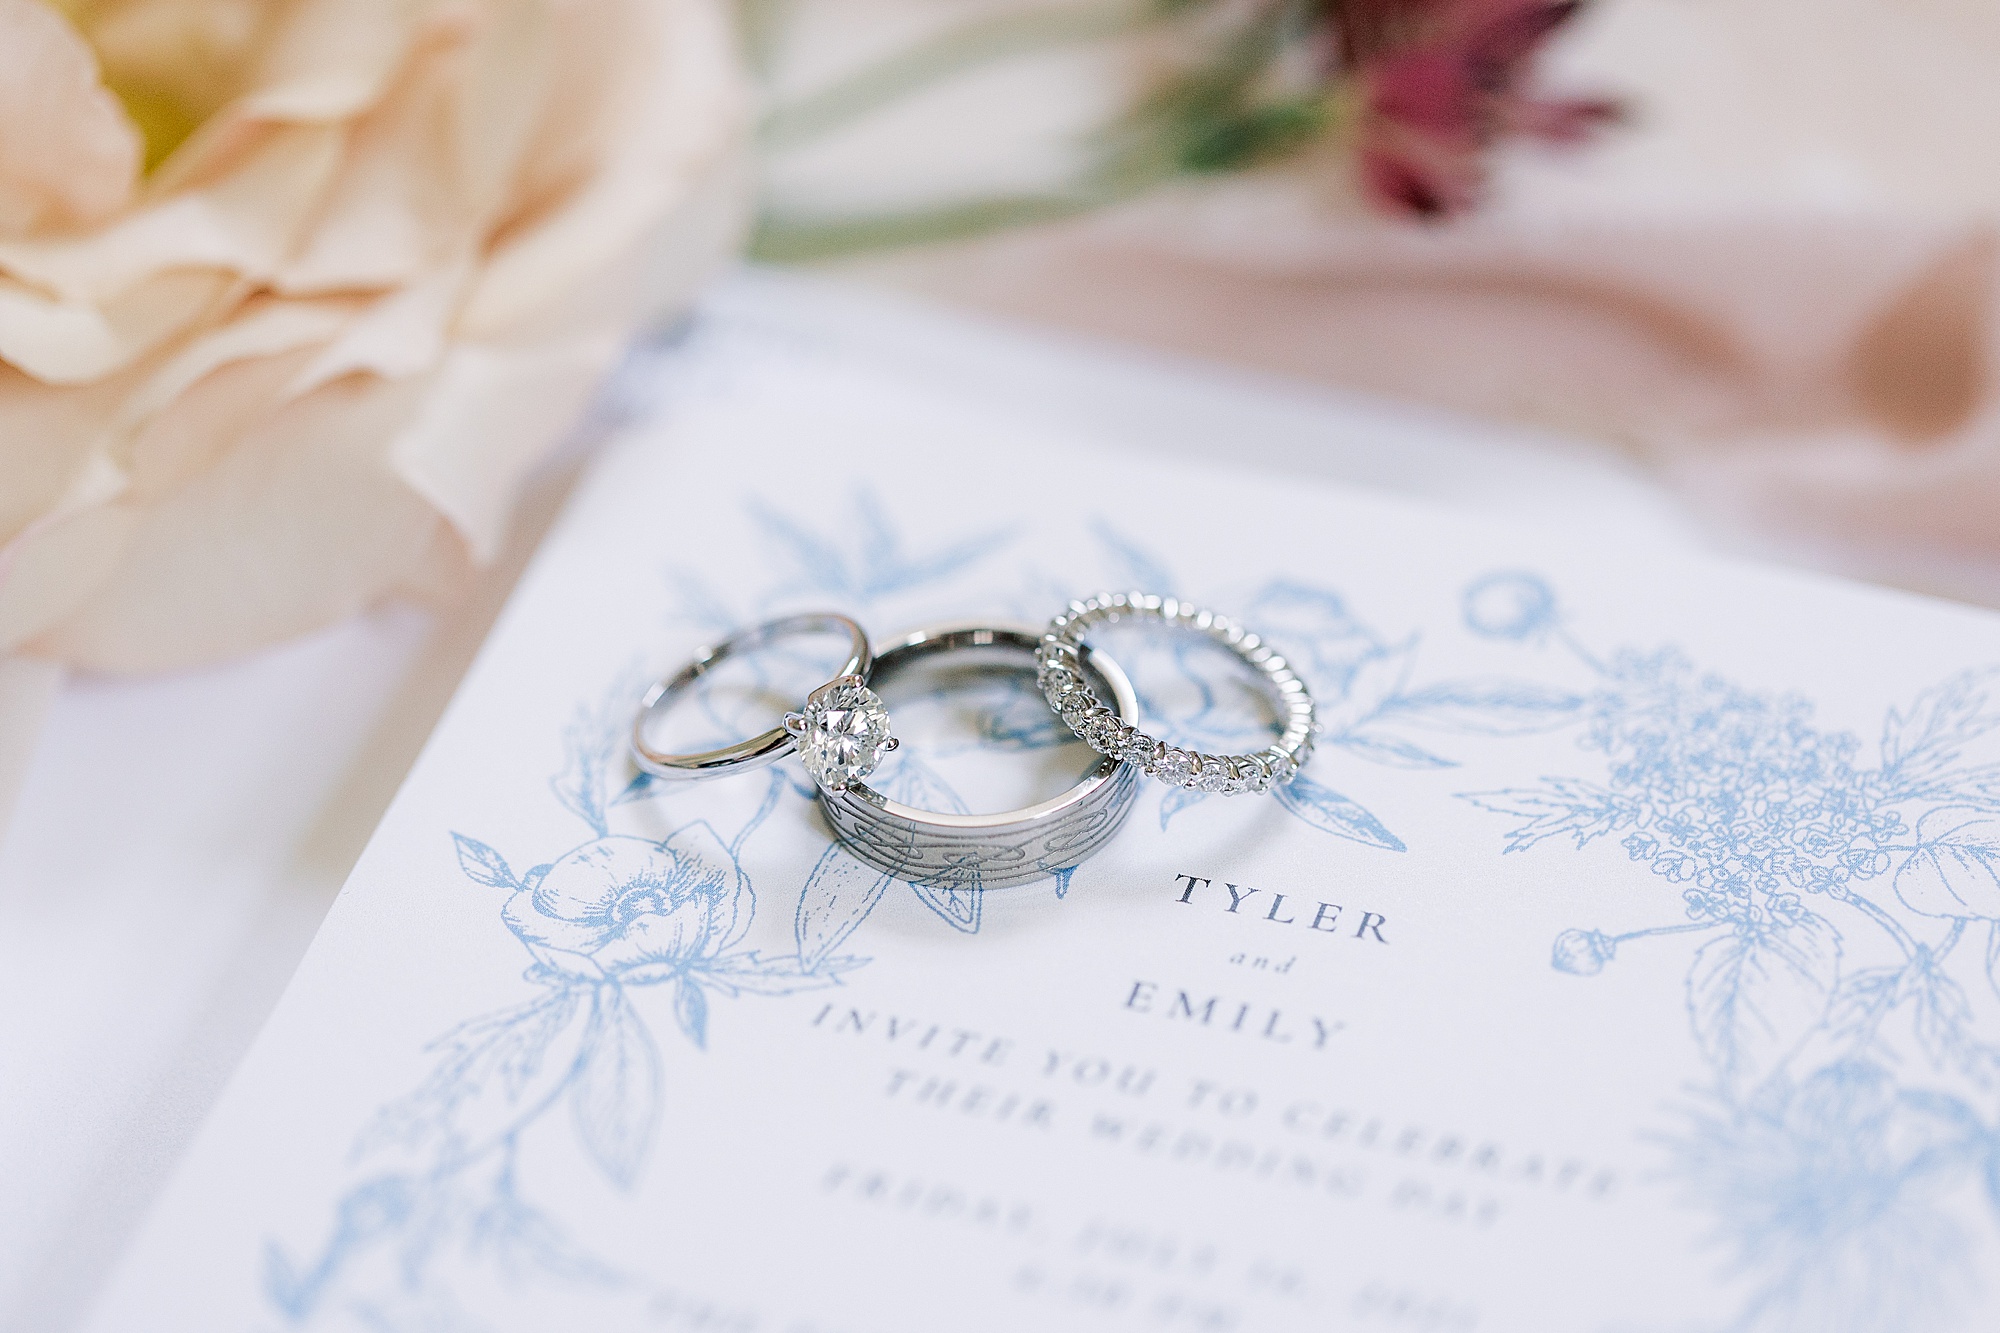 silver wedding bands lay stacked on blue and white invitation suite 